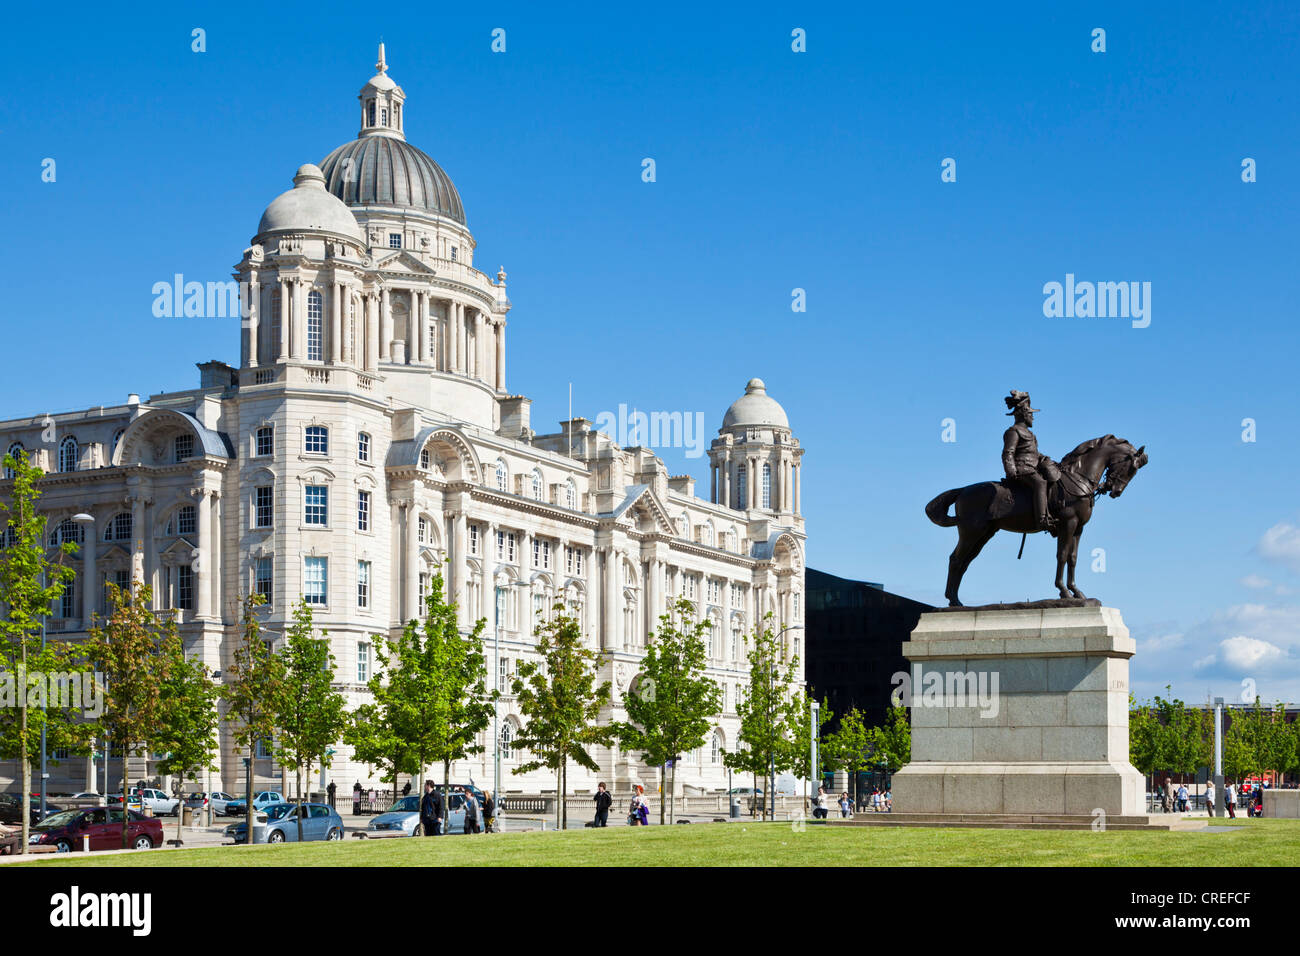 Port of Liverpool Building Liverpool waterfront Pier Head Merseyside England uk gb eu Europe Banque D'Images